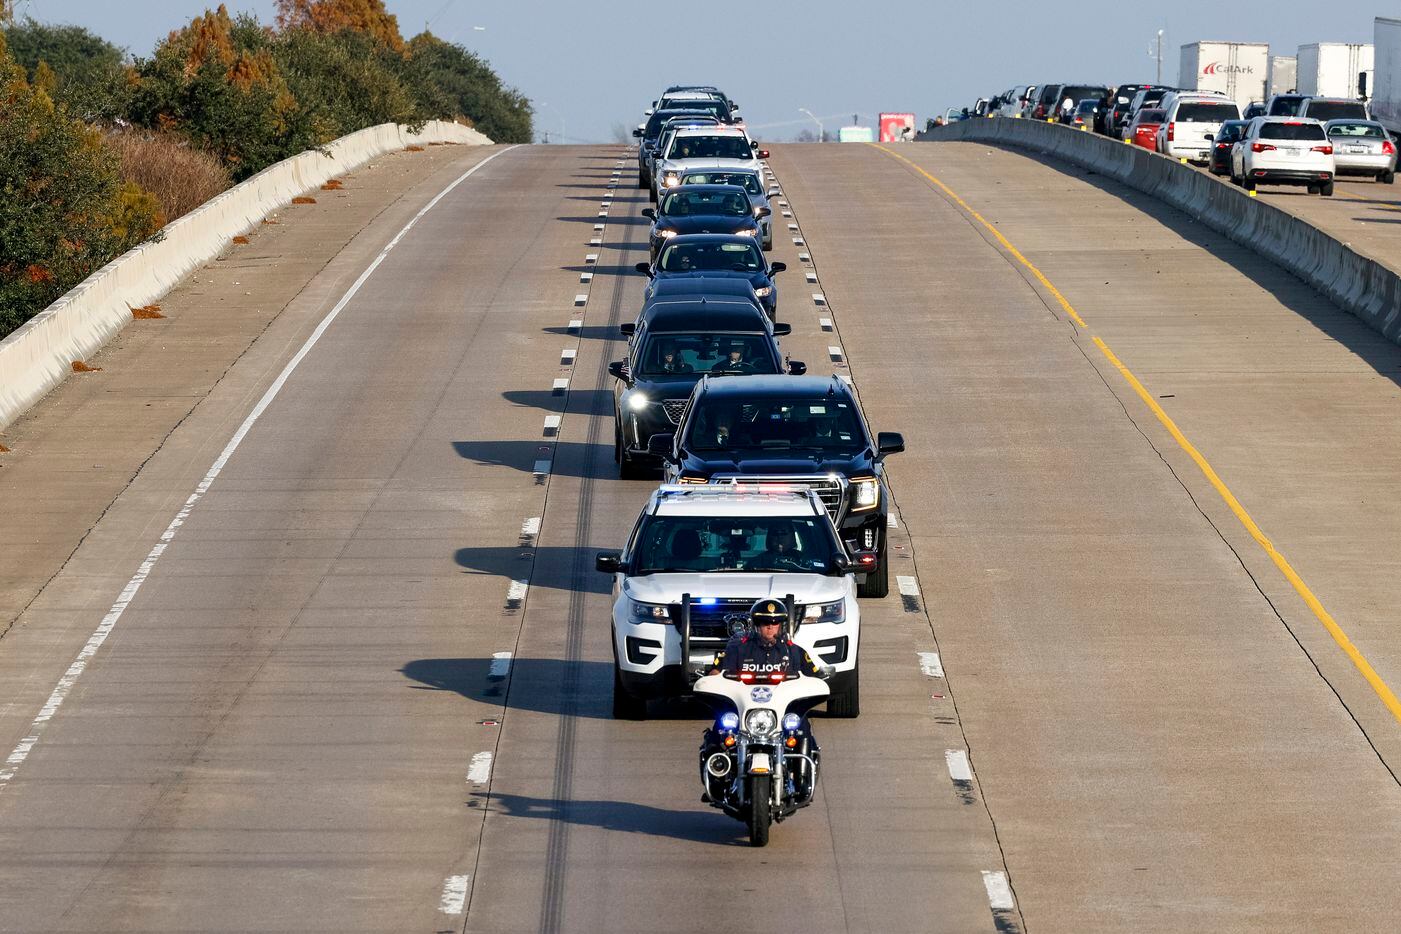 Mesquite police officers lead the funeral procession for Mesquite police officer Richard...